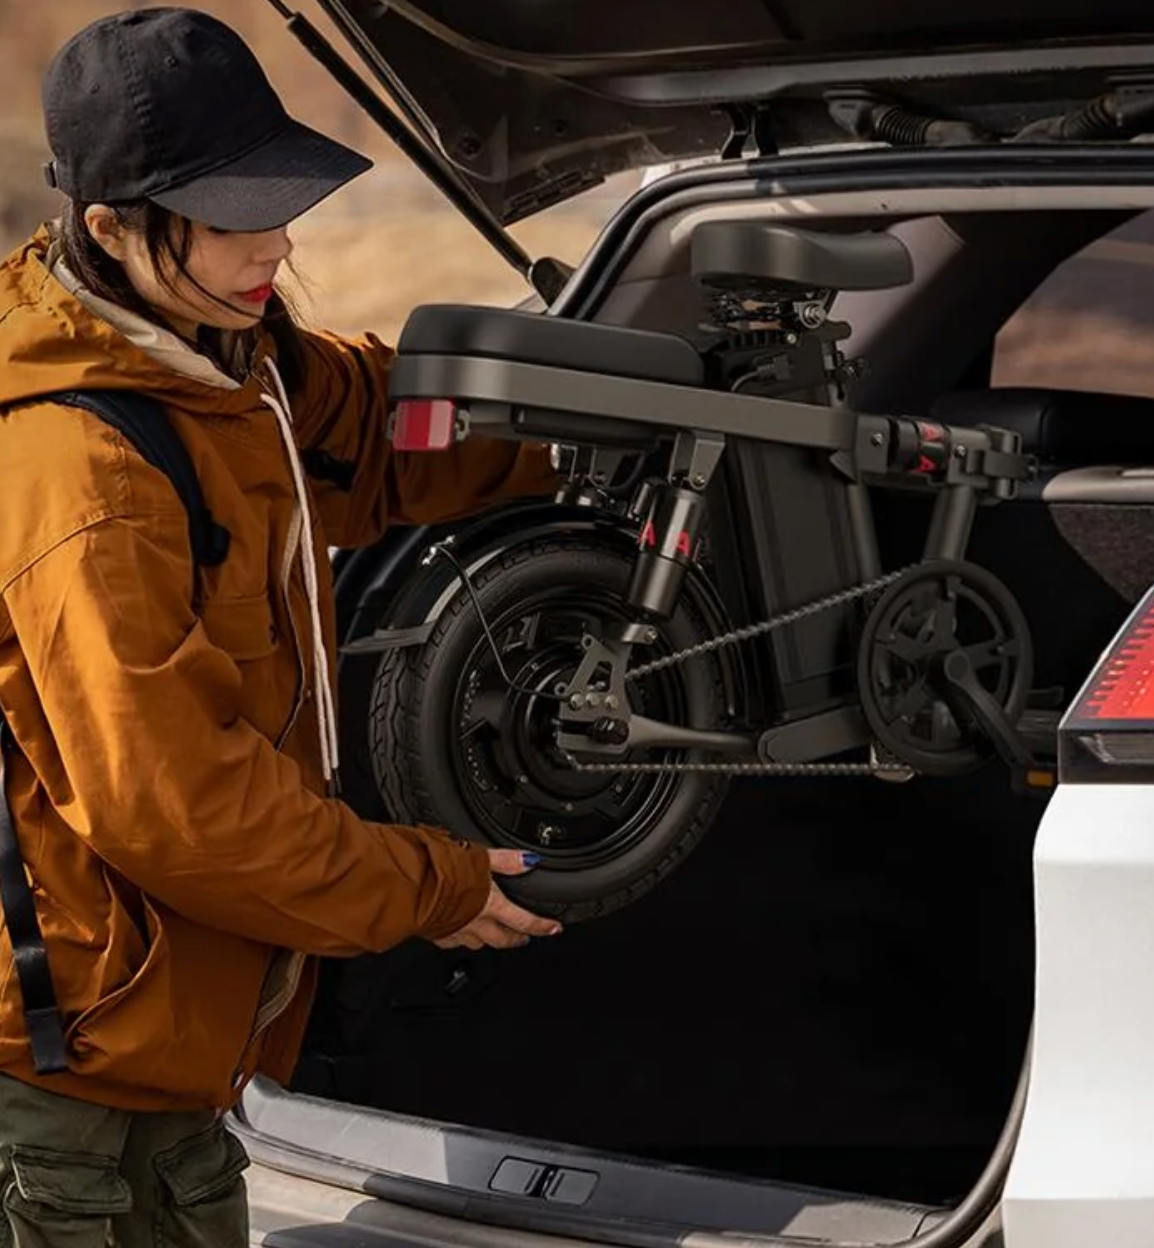 Woman folding Engwe T14 Ebike into car trunk, highlighting its compact design and portability.